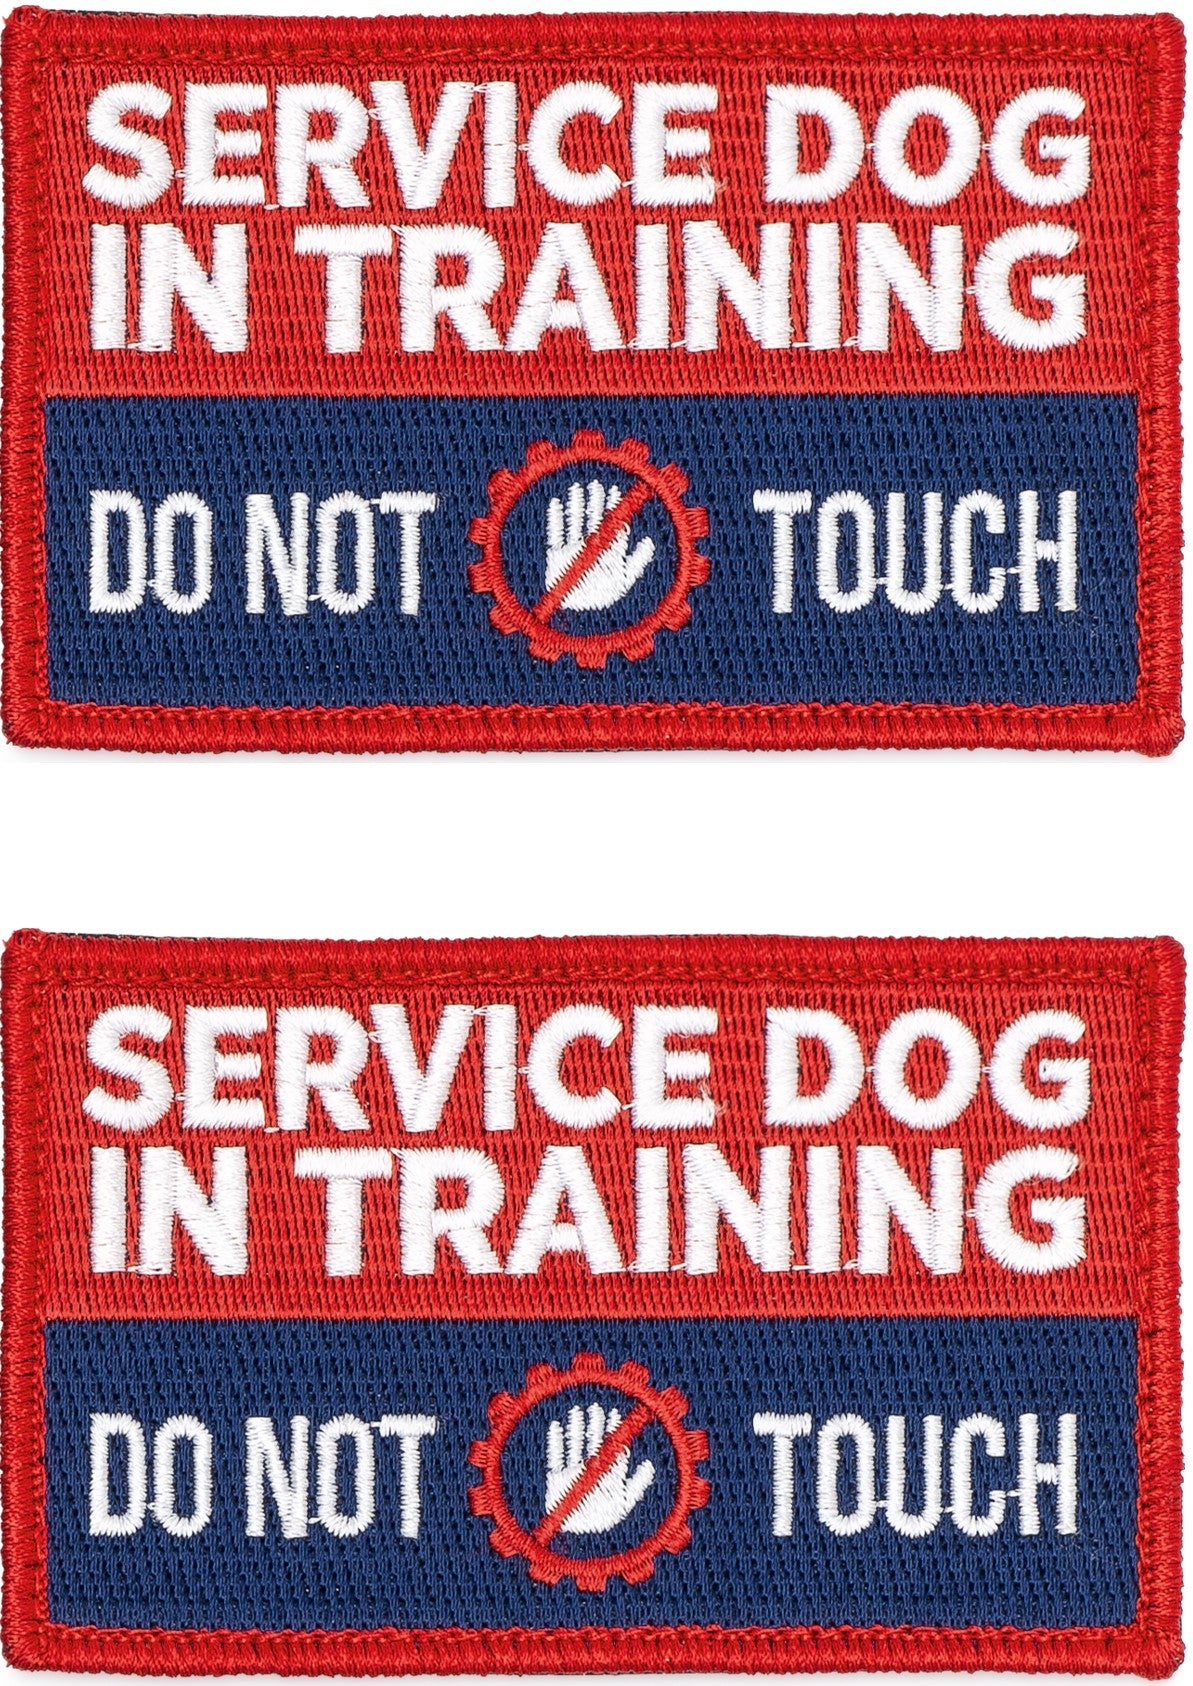 working service dog patches